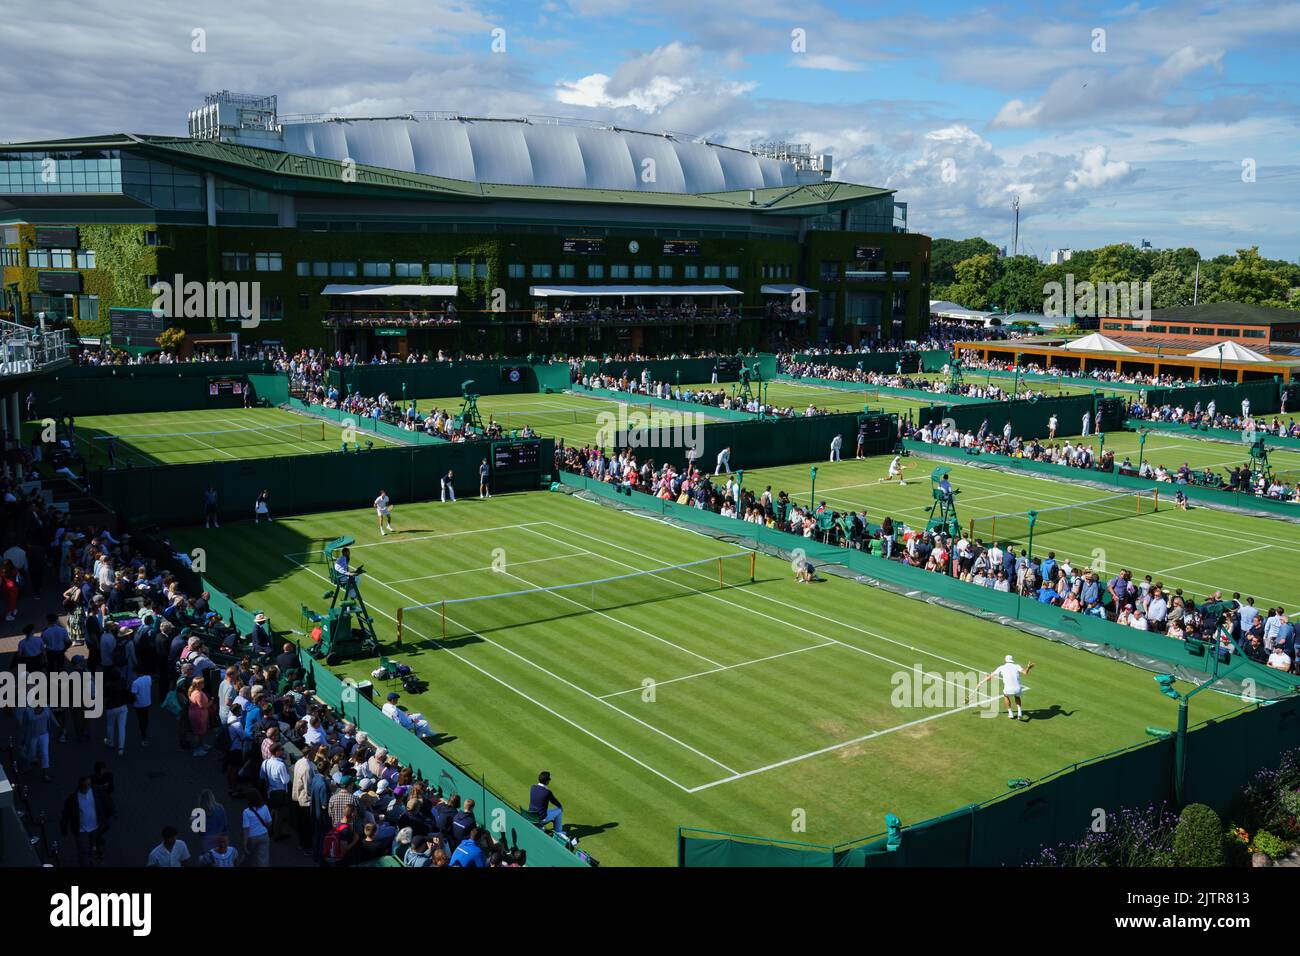 General Views of Court 8 with Maximilian Marterer and Aljaz Bedene at The Championships 2022. Held at The All England Lawn Tennis Club, Wimbledon. Stock Photo